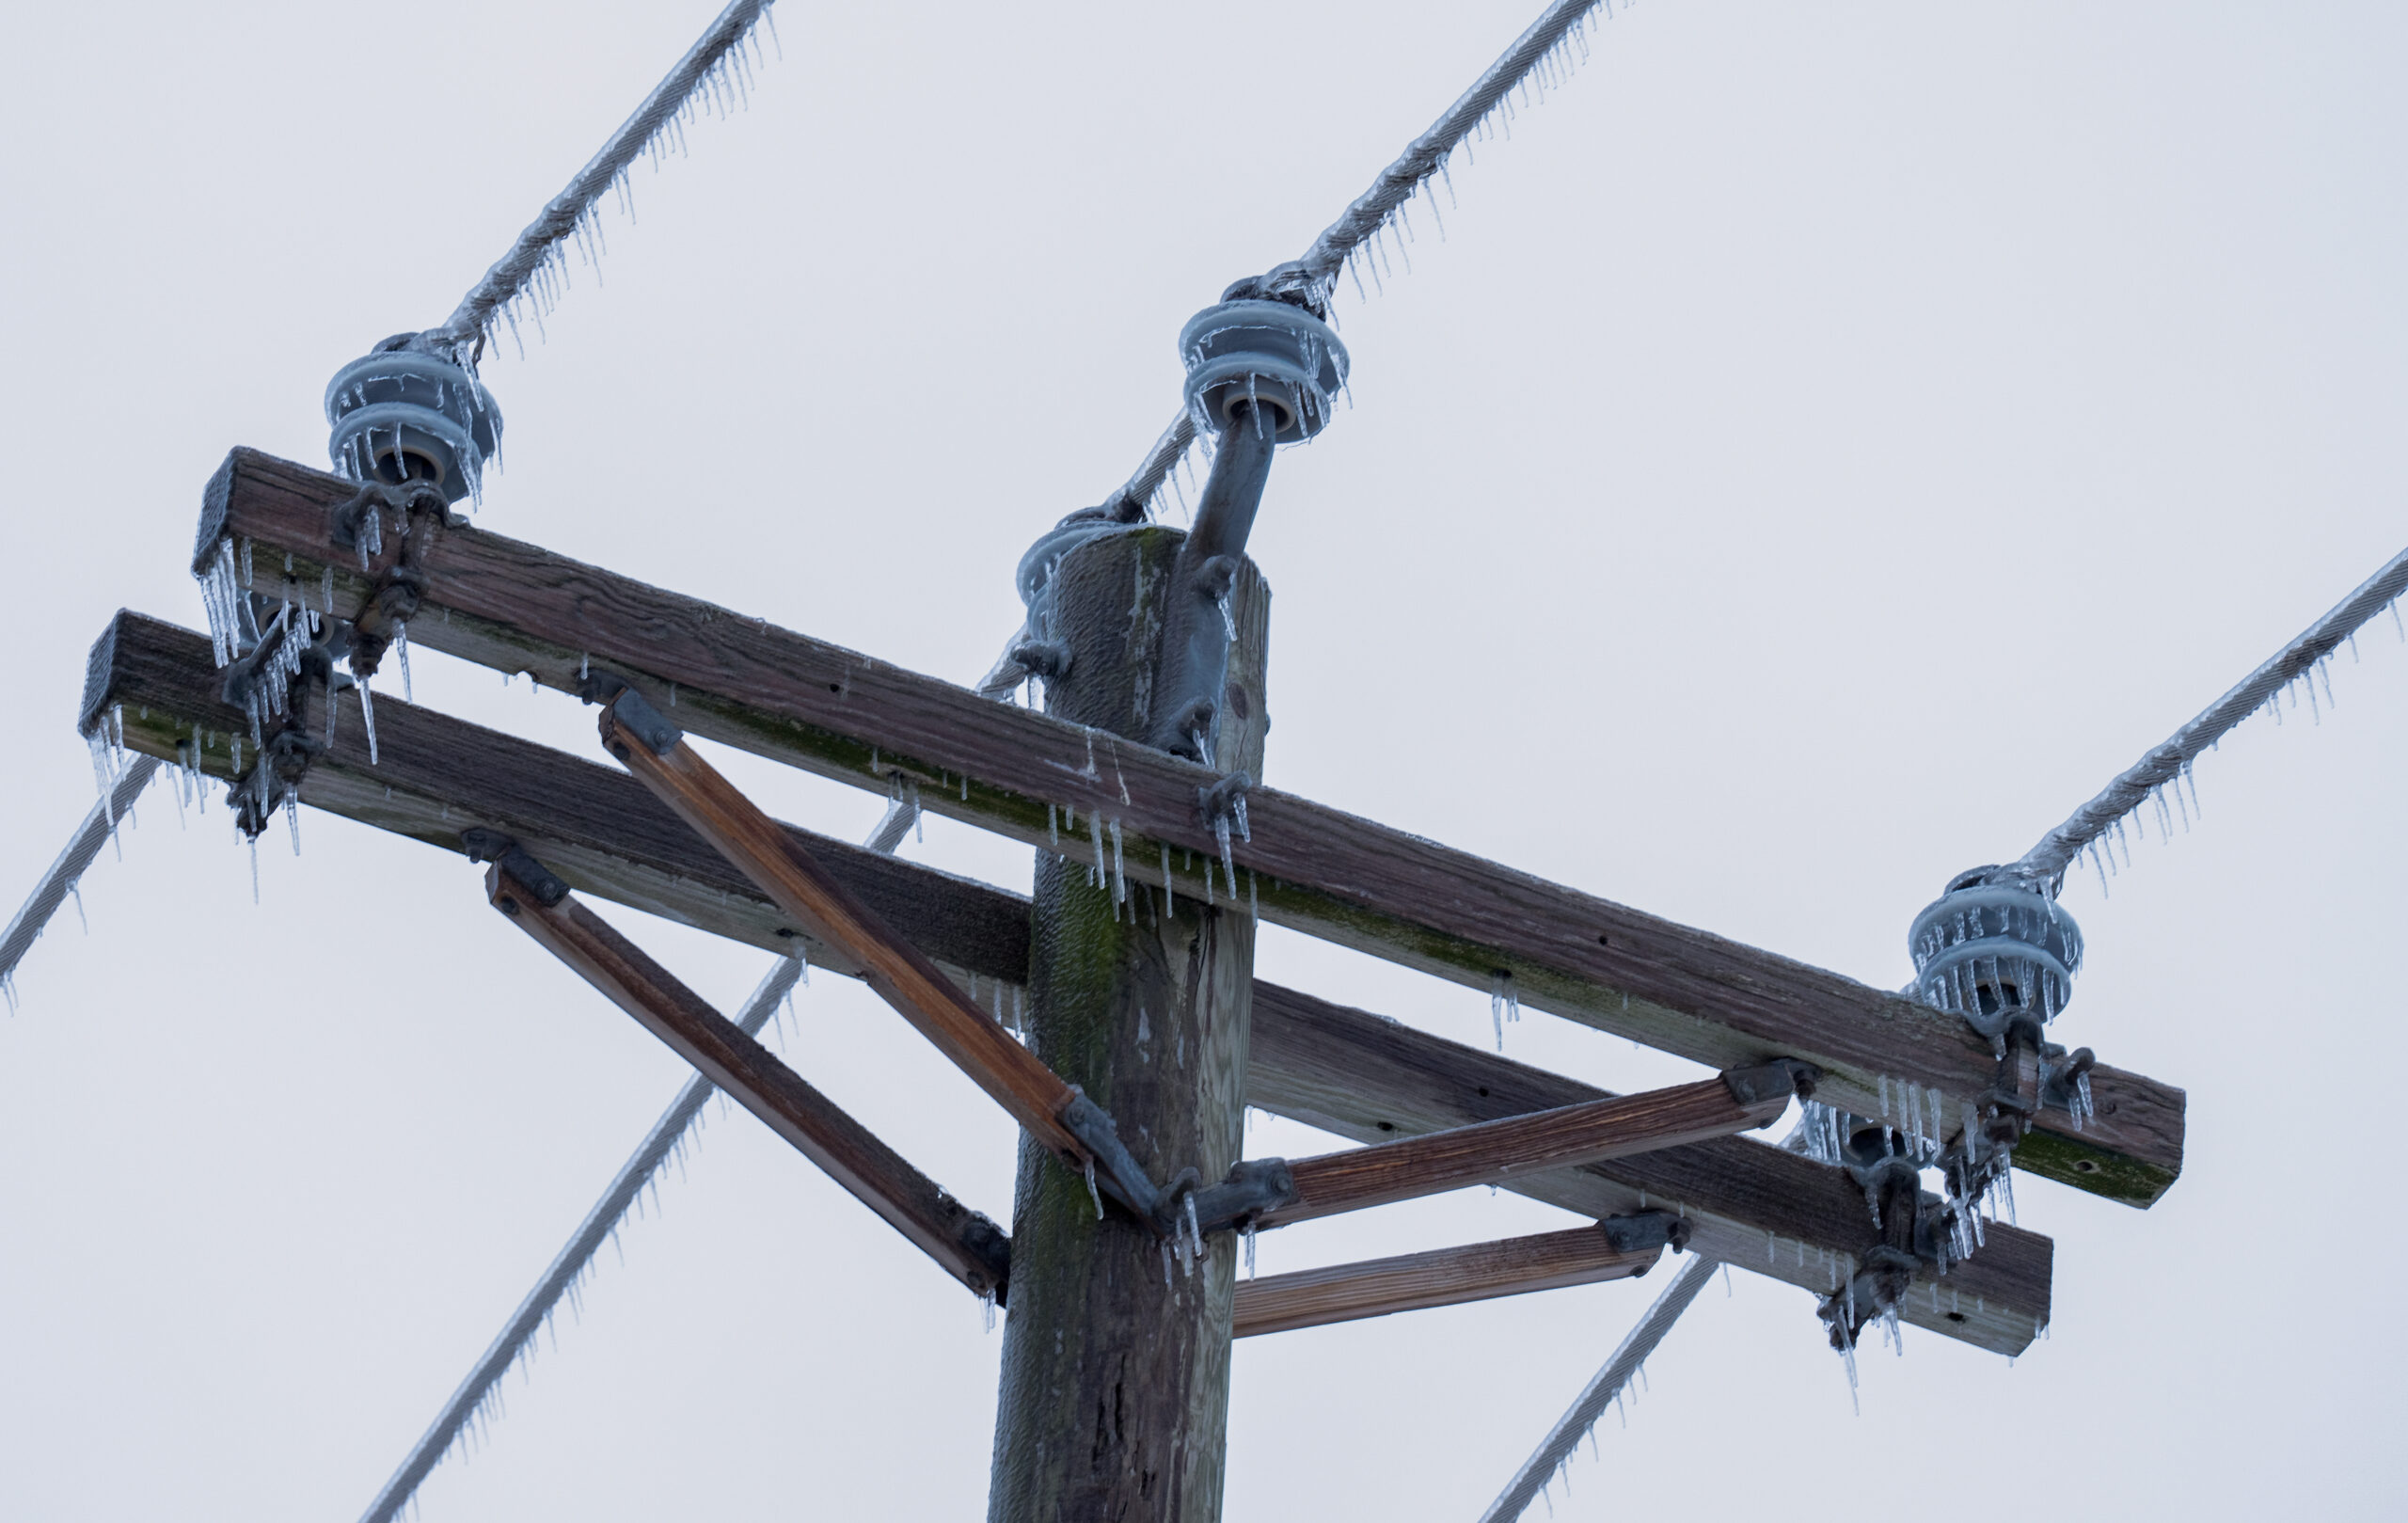 It's common for ice to form on the power lines, which is why CoServ inspects its infrastructure to ensure it's ready. 